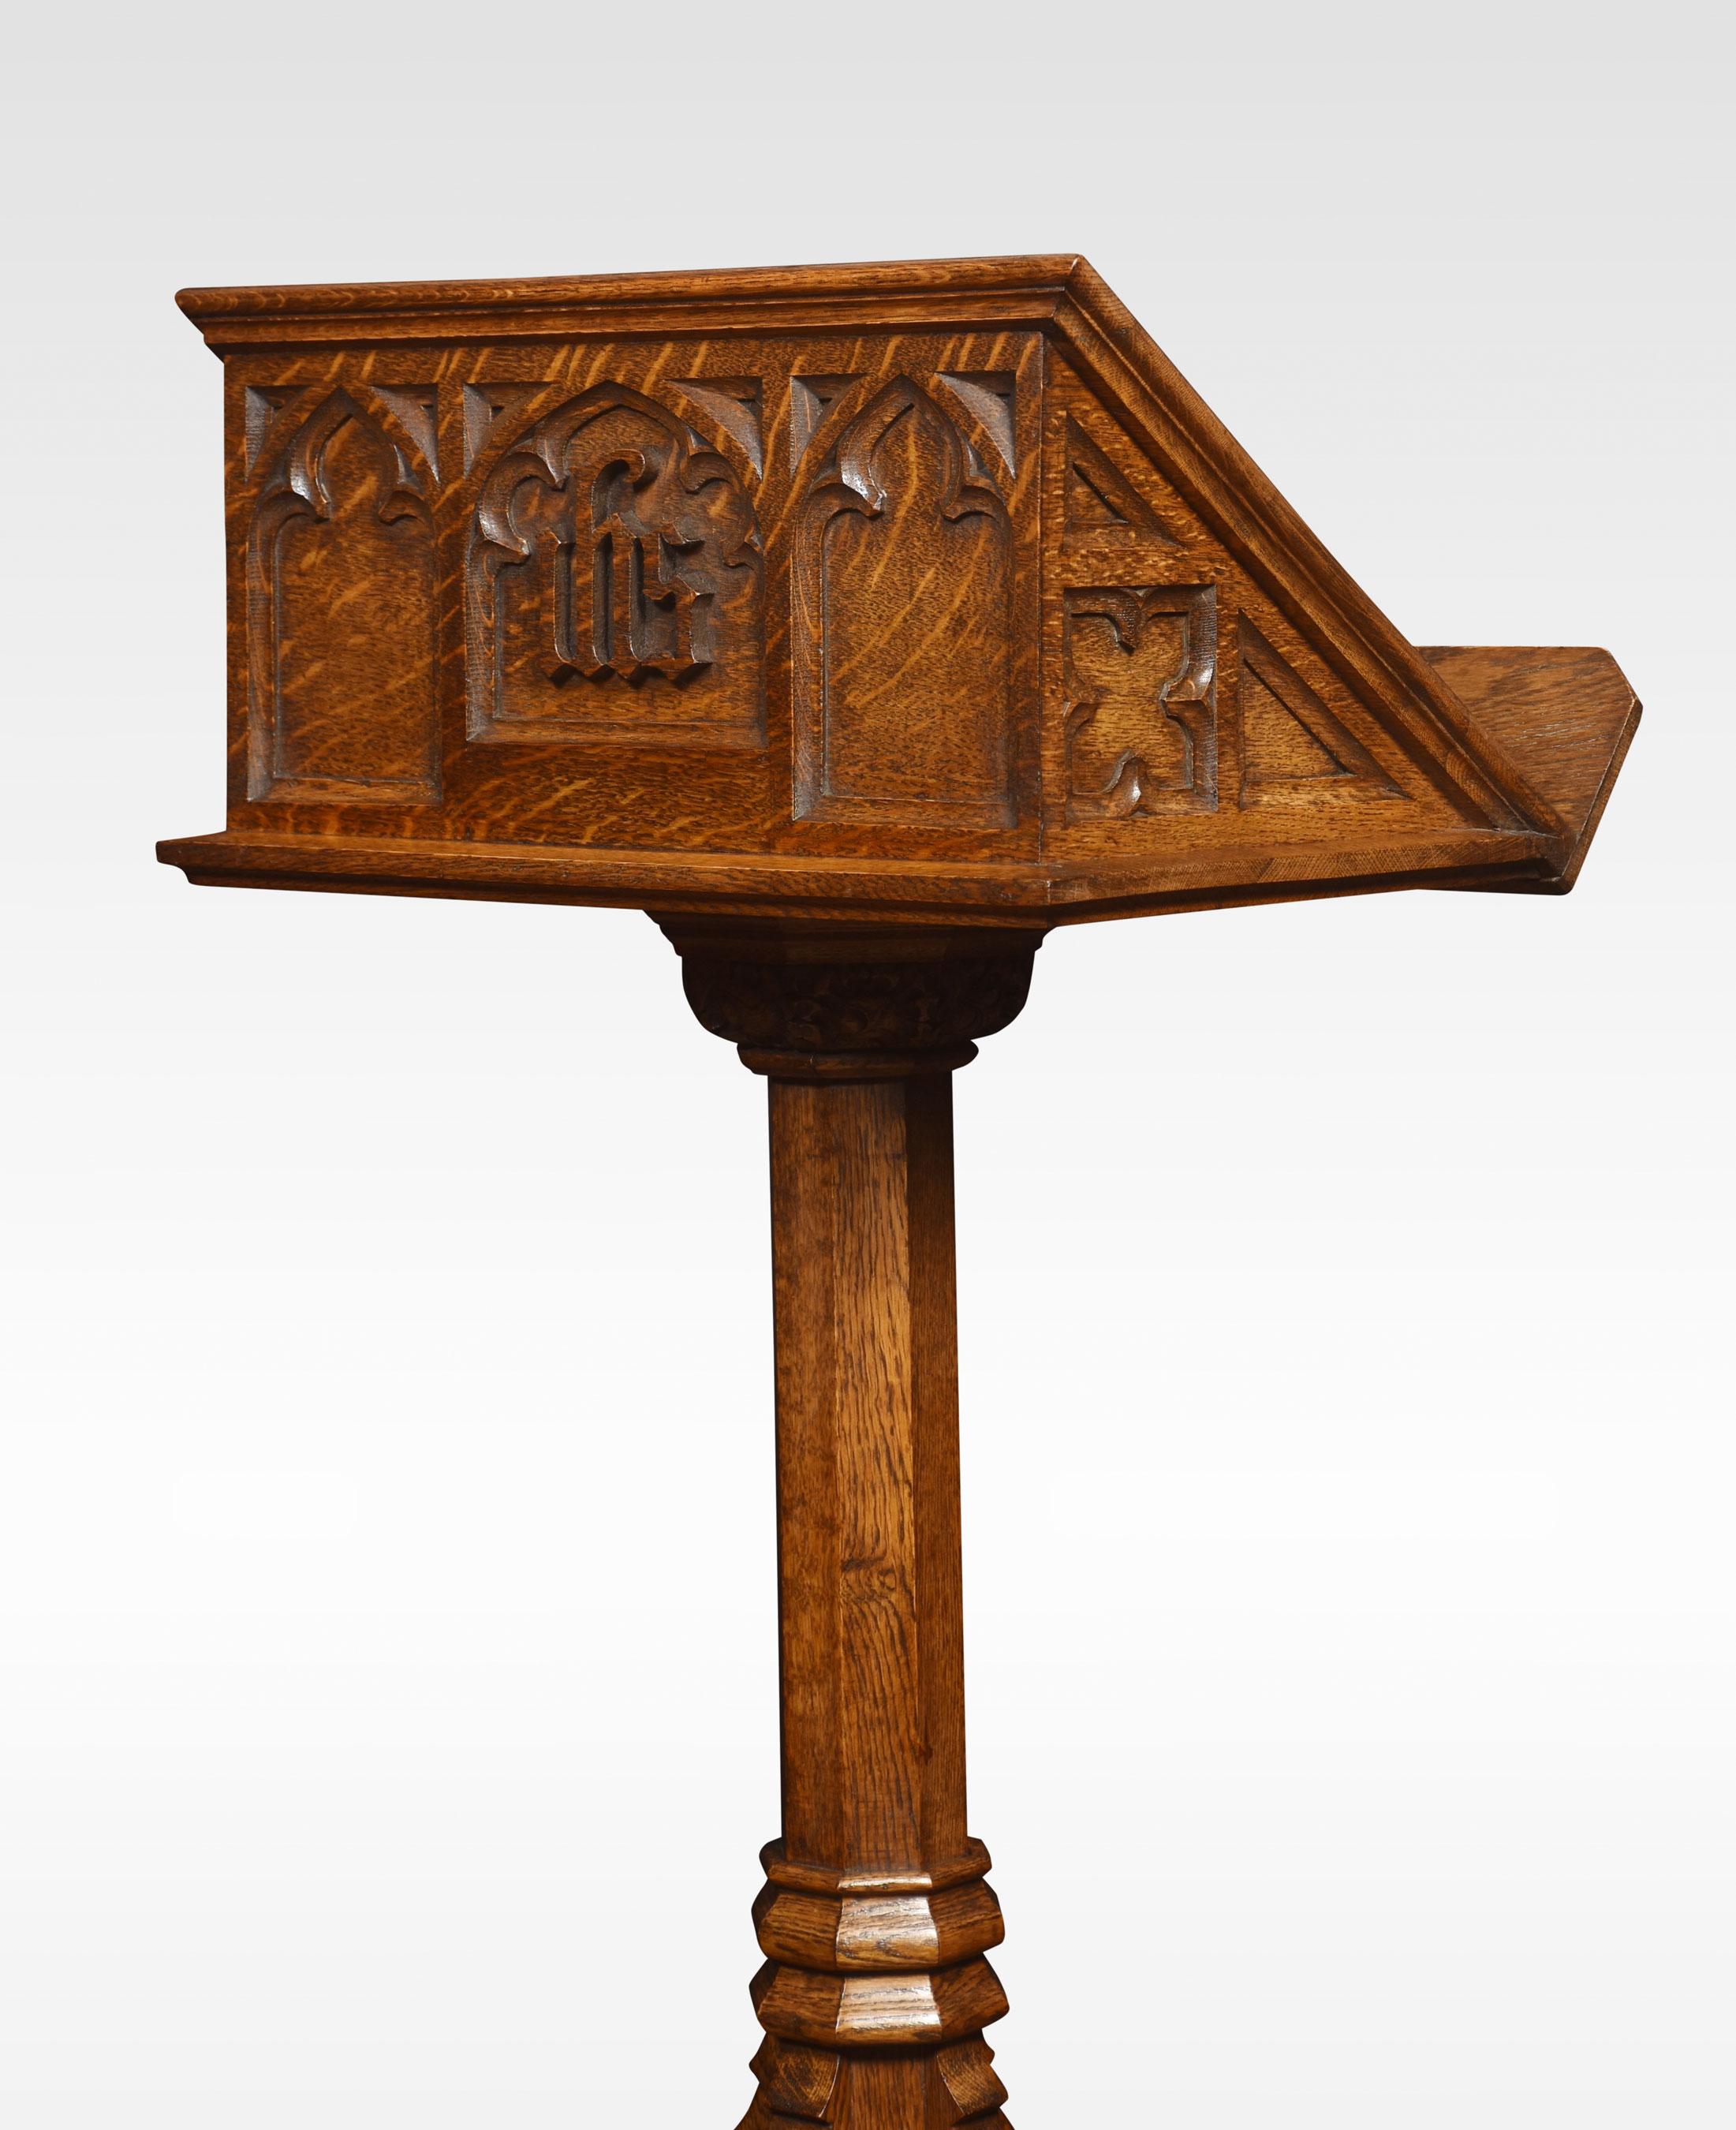 Oak lectern the Gothic carved bookrest, raised up on an octagonal carved column and stepped square base.
Dimensions
Height 54 Inches
Width 18 Inches
Depth 17.5 Inches.